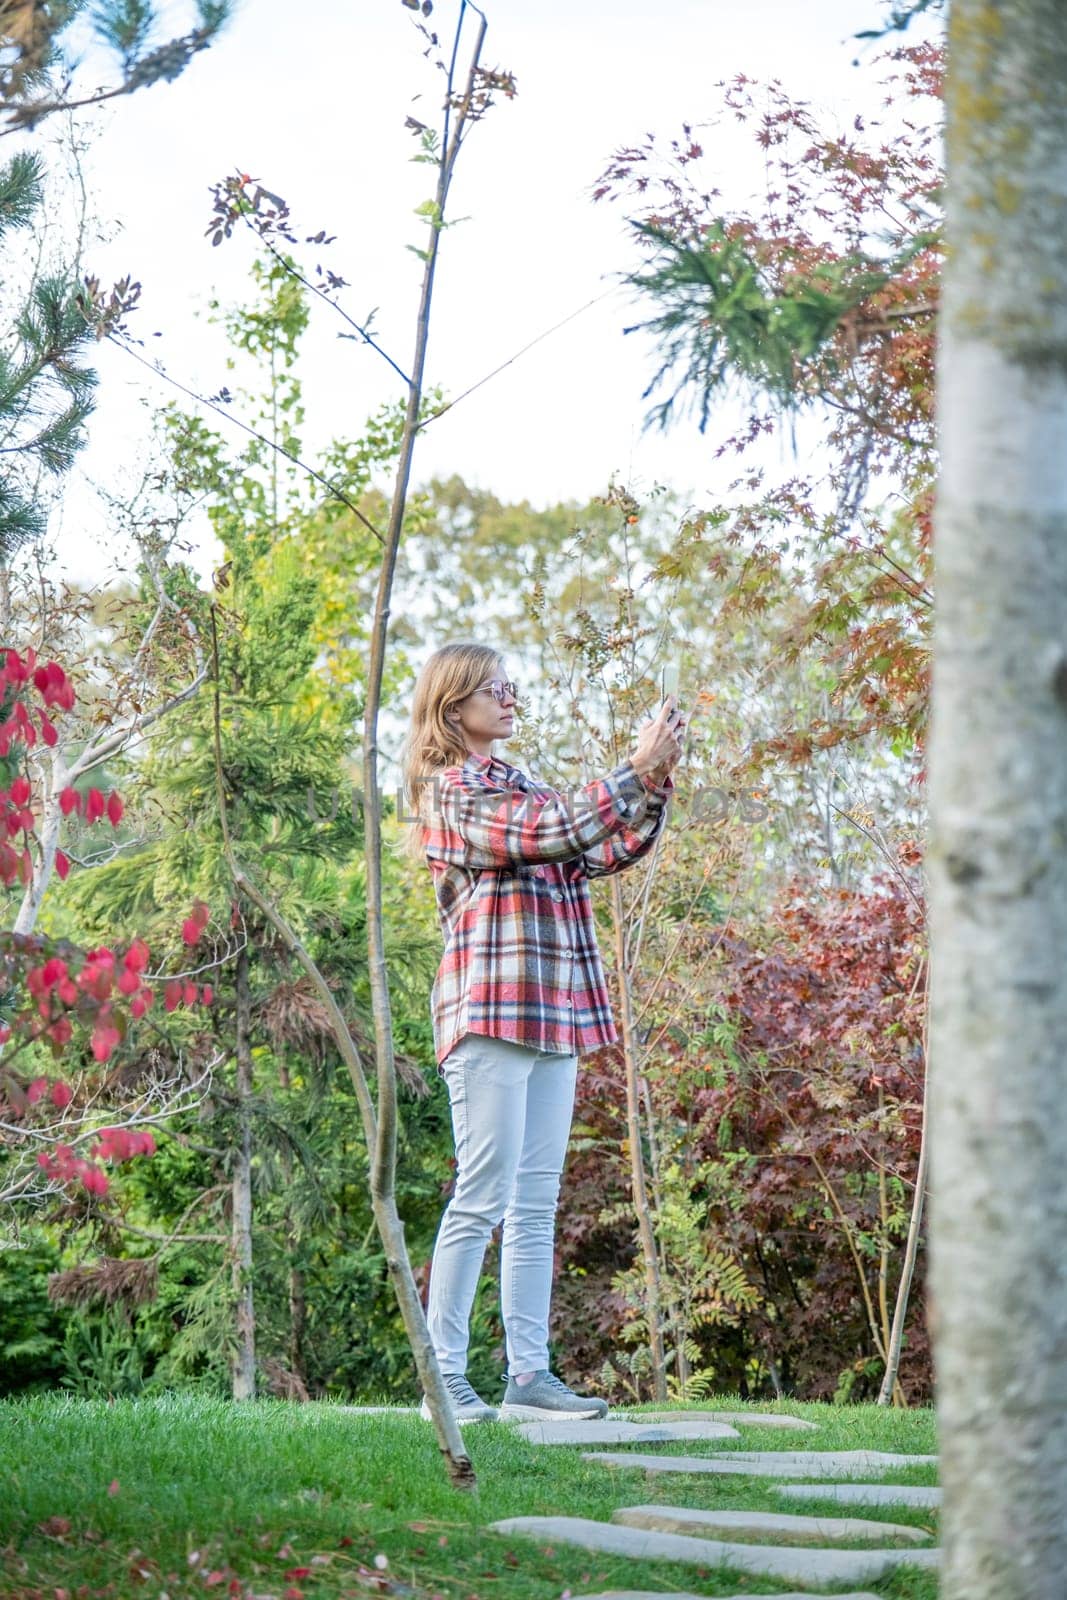 Woman in red plaid shirt enjoying nature standing in Japanese Garden taking photo on smartphone